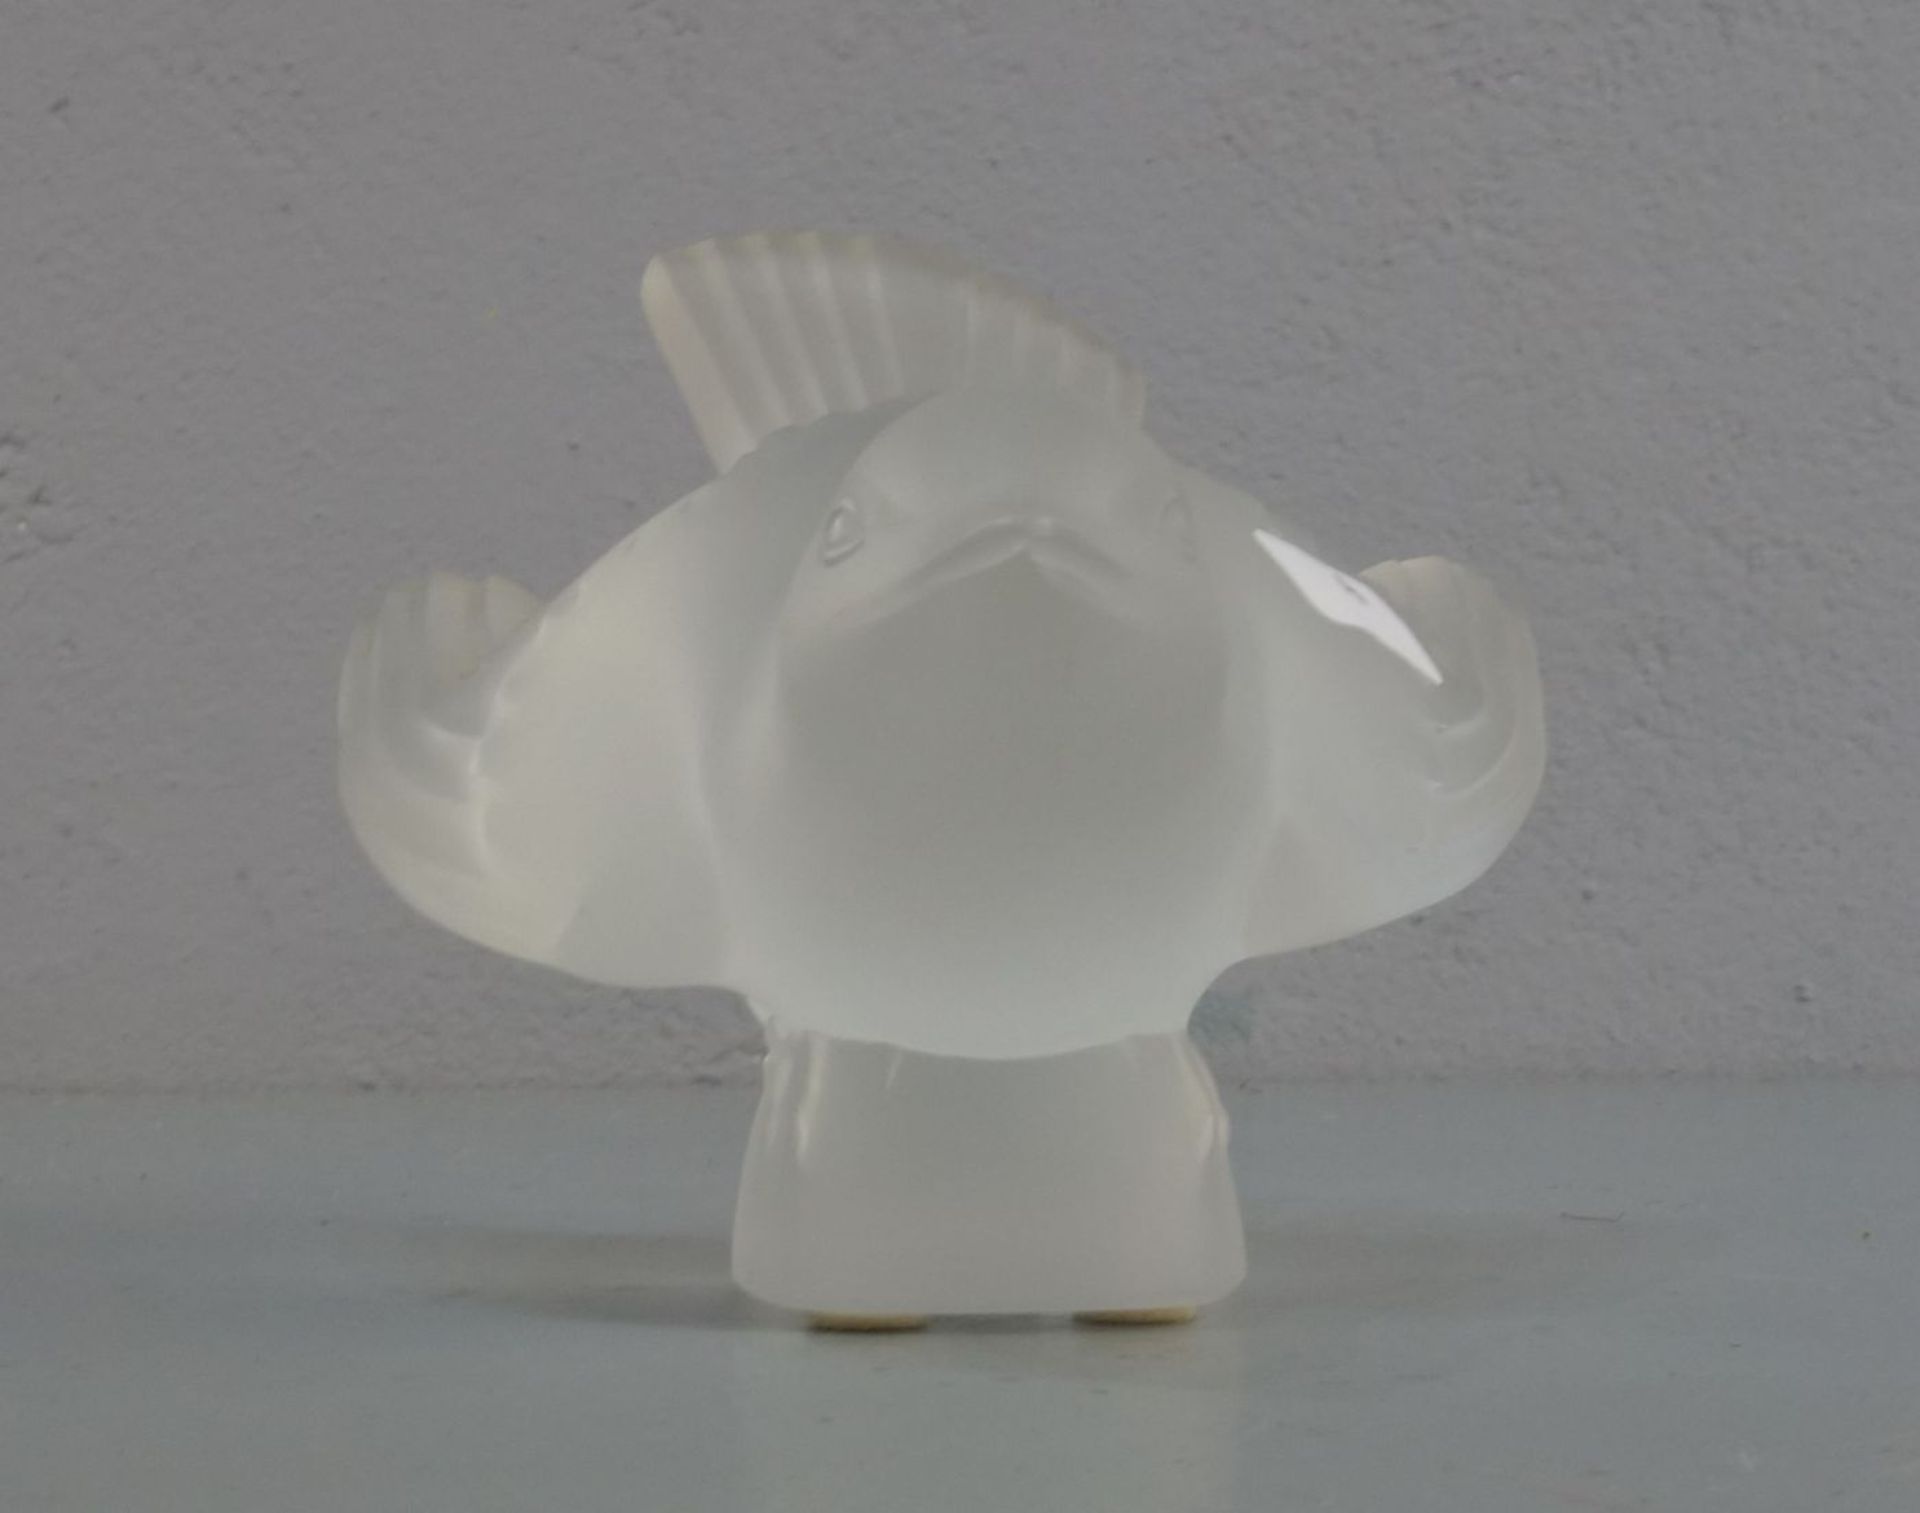 LALIQUE GLASFIGUR / PAPERWEIGHT "VOGEL" - Image 2 of 4